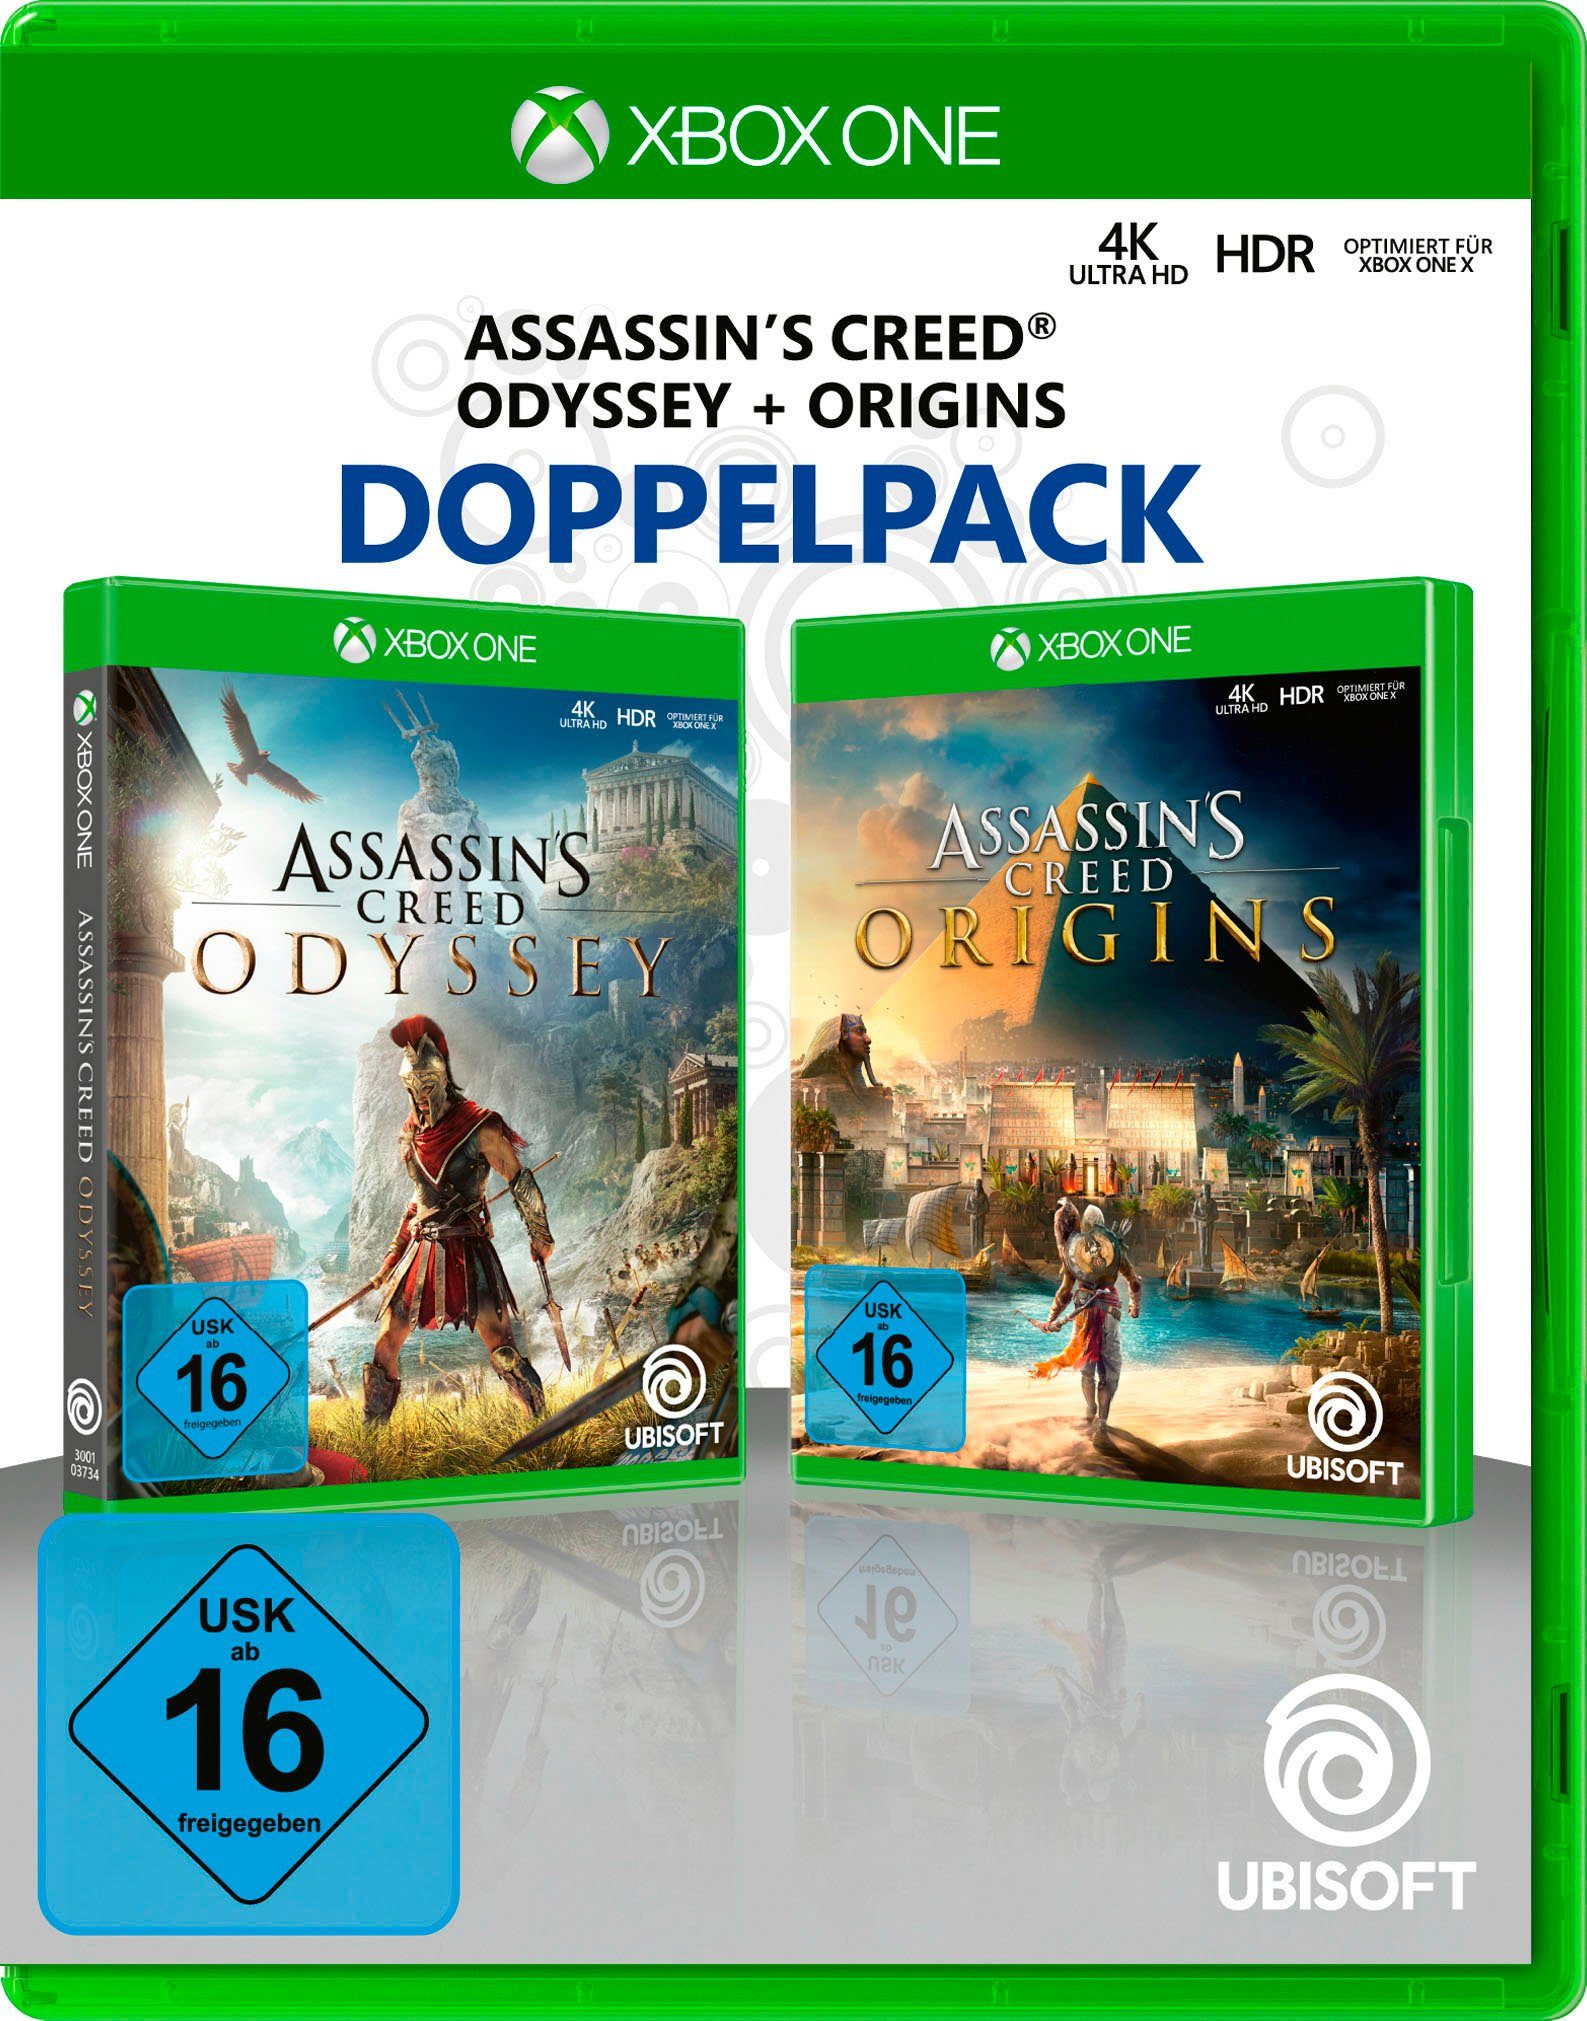 Double Xbox UBISOFT + Pack Origins Assassin's One Creed Odyssey